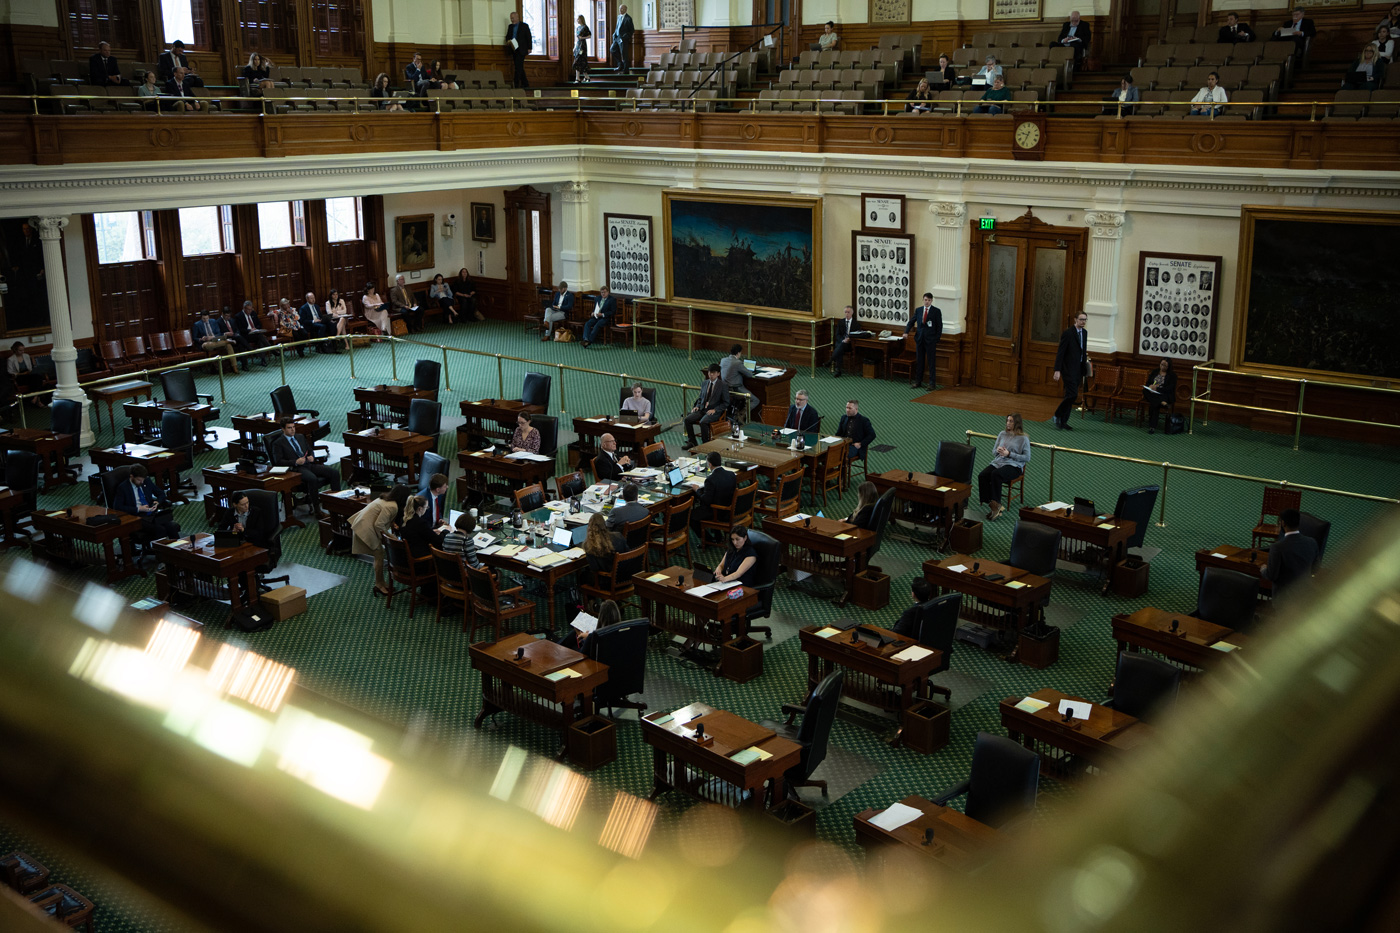 View of the Texas Senate Chambers from above the floor.